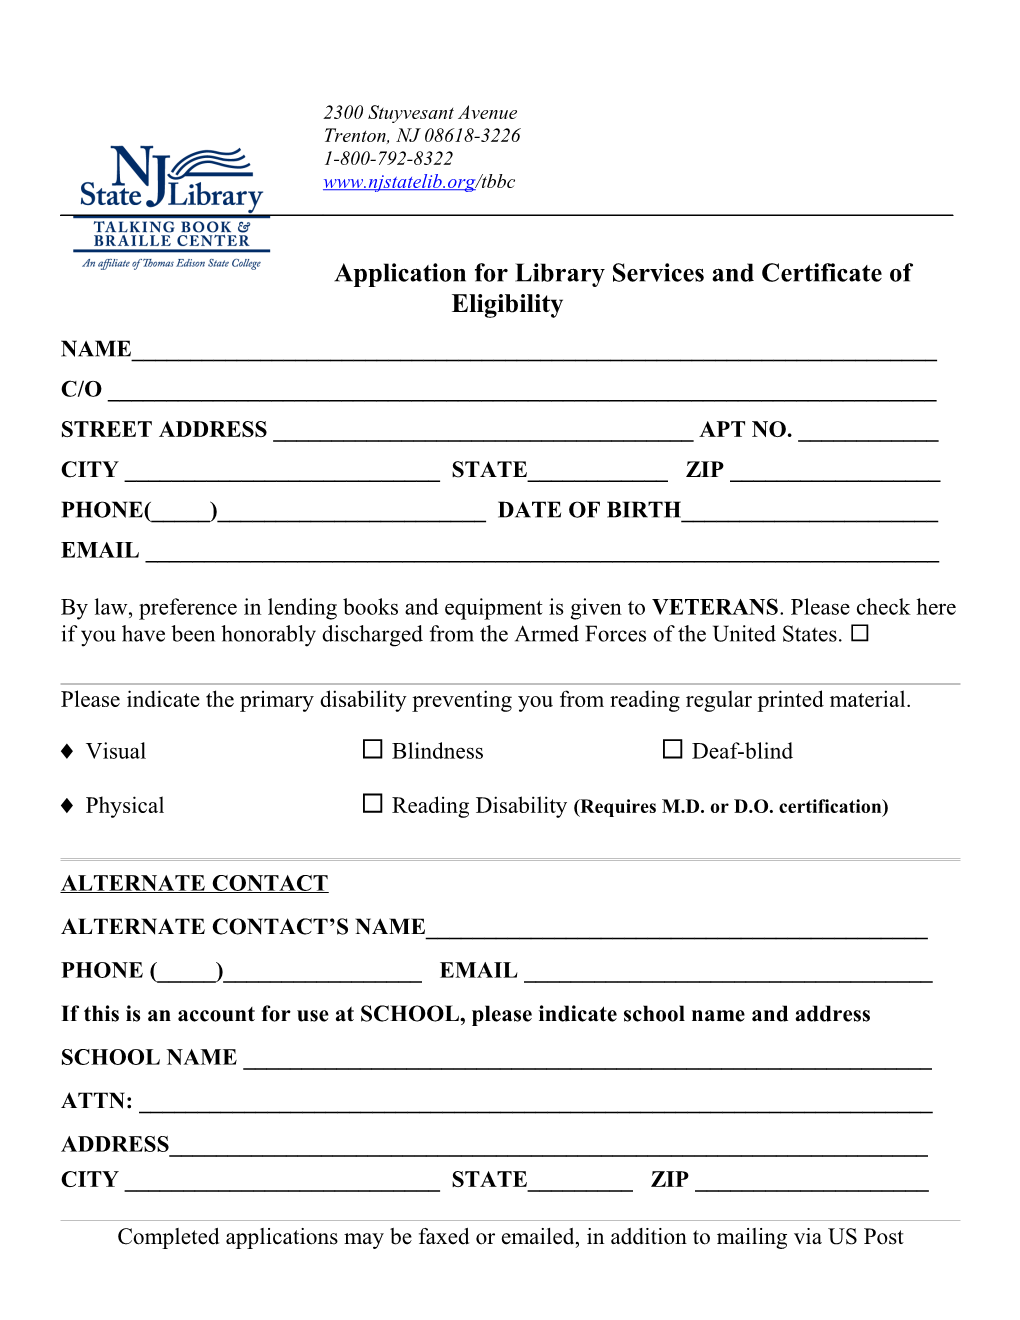 Application for Library Services and Certificate of Eligibility